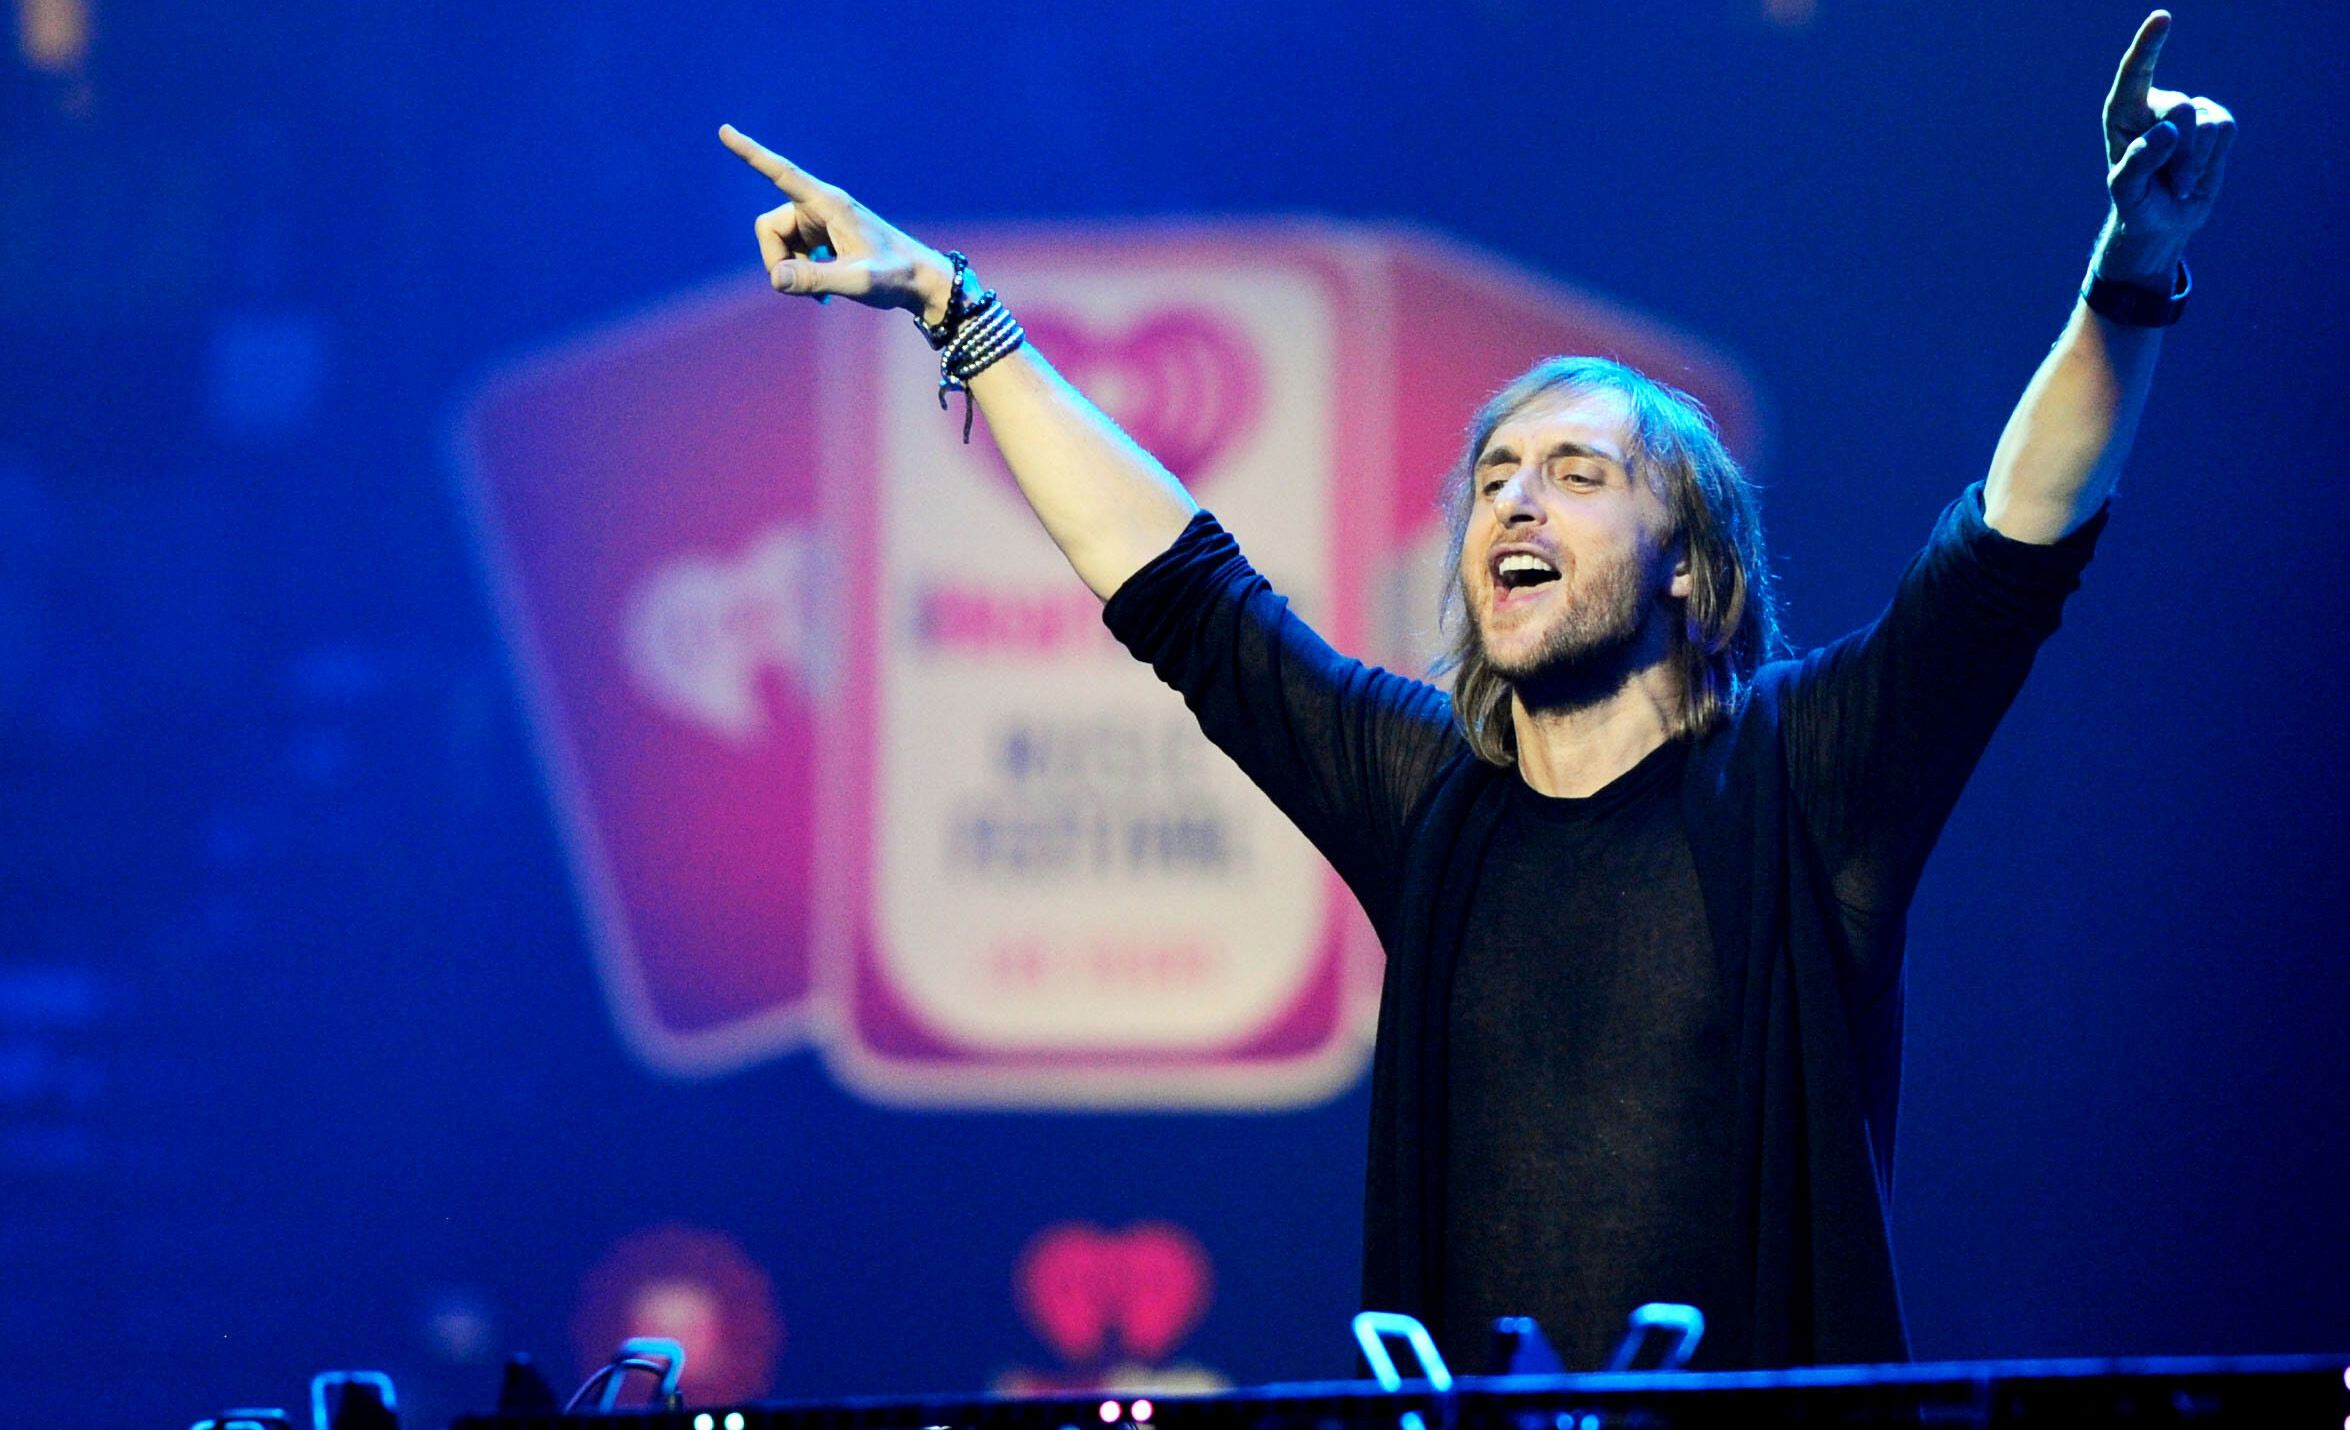 David Guetta: Received five nominations at the 52nd Grammy Awards, 2010. 2350x1430 HD Background.